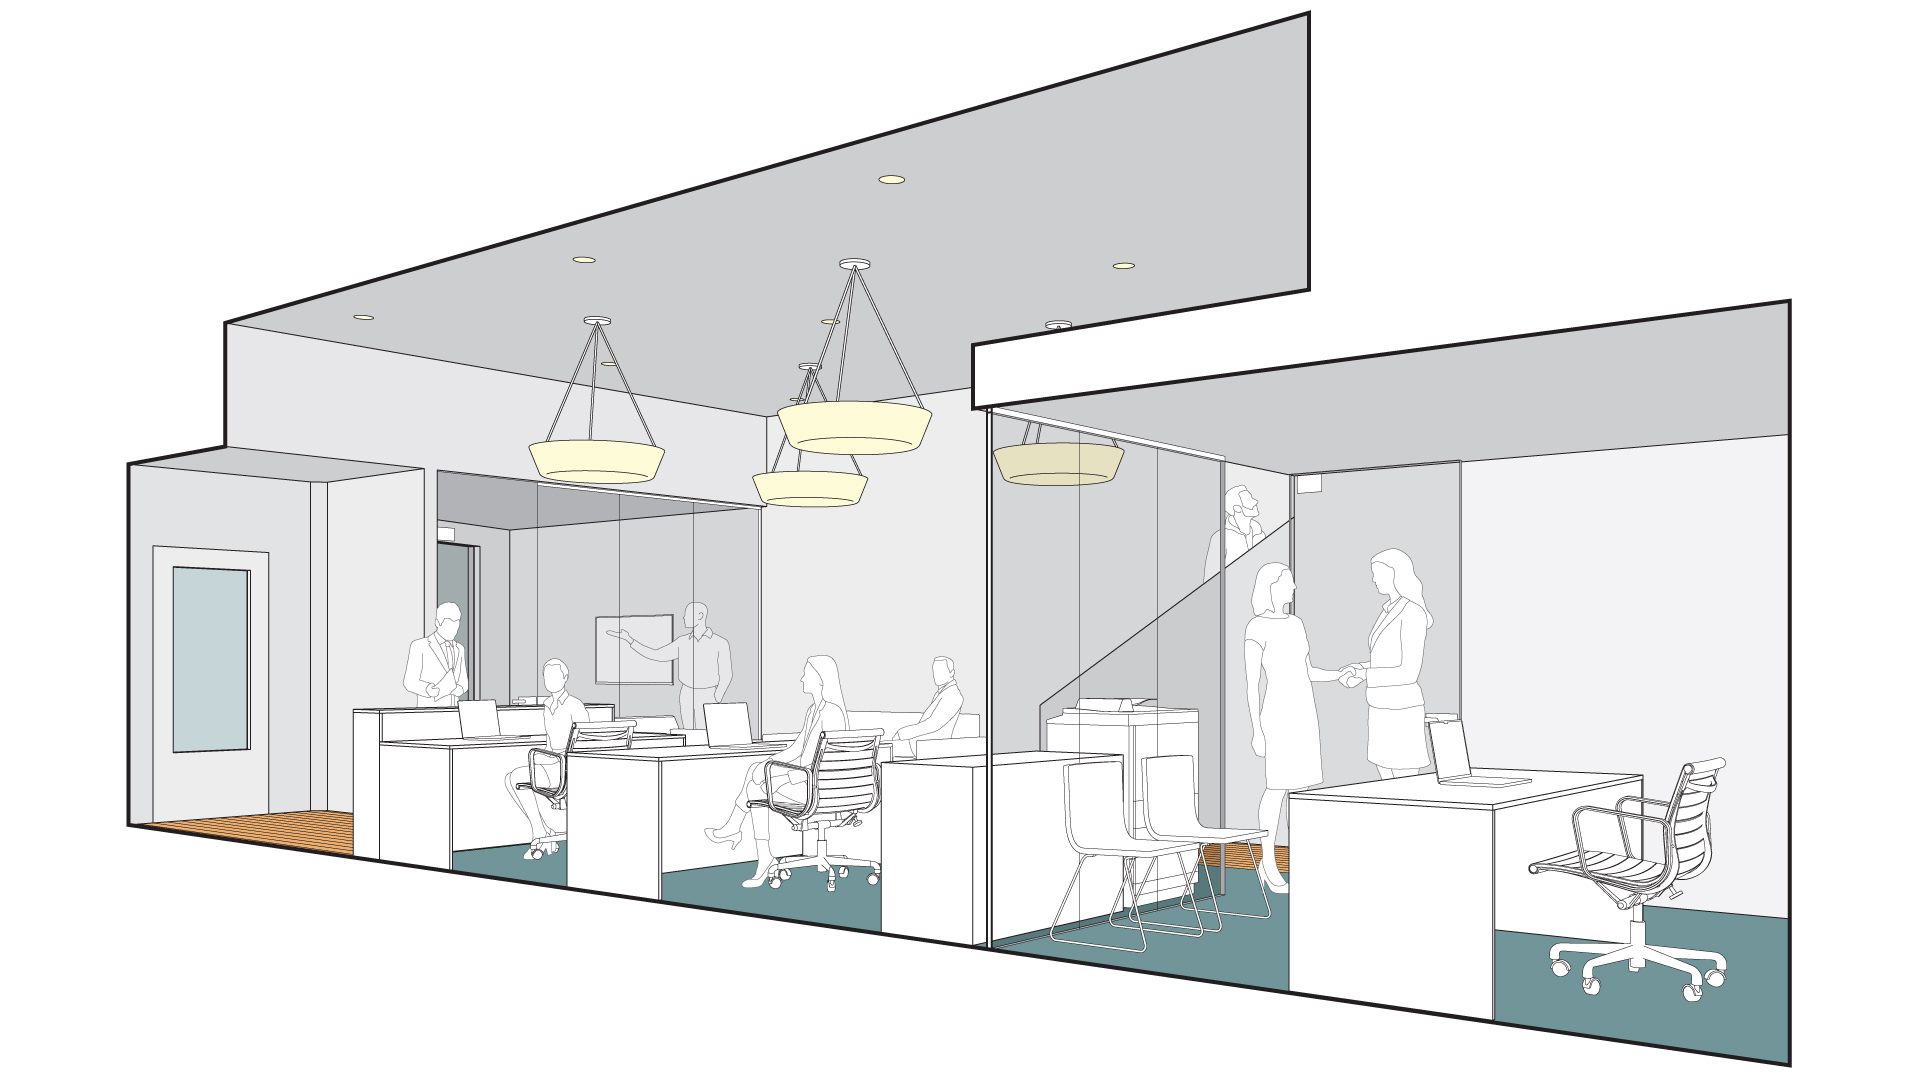 This is a 3-dimensional drawing of the interior of the Multnomah Real Estate office.